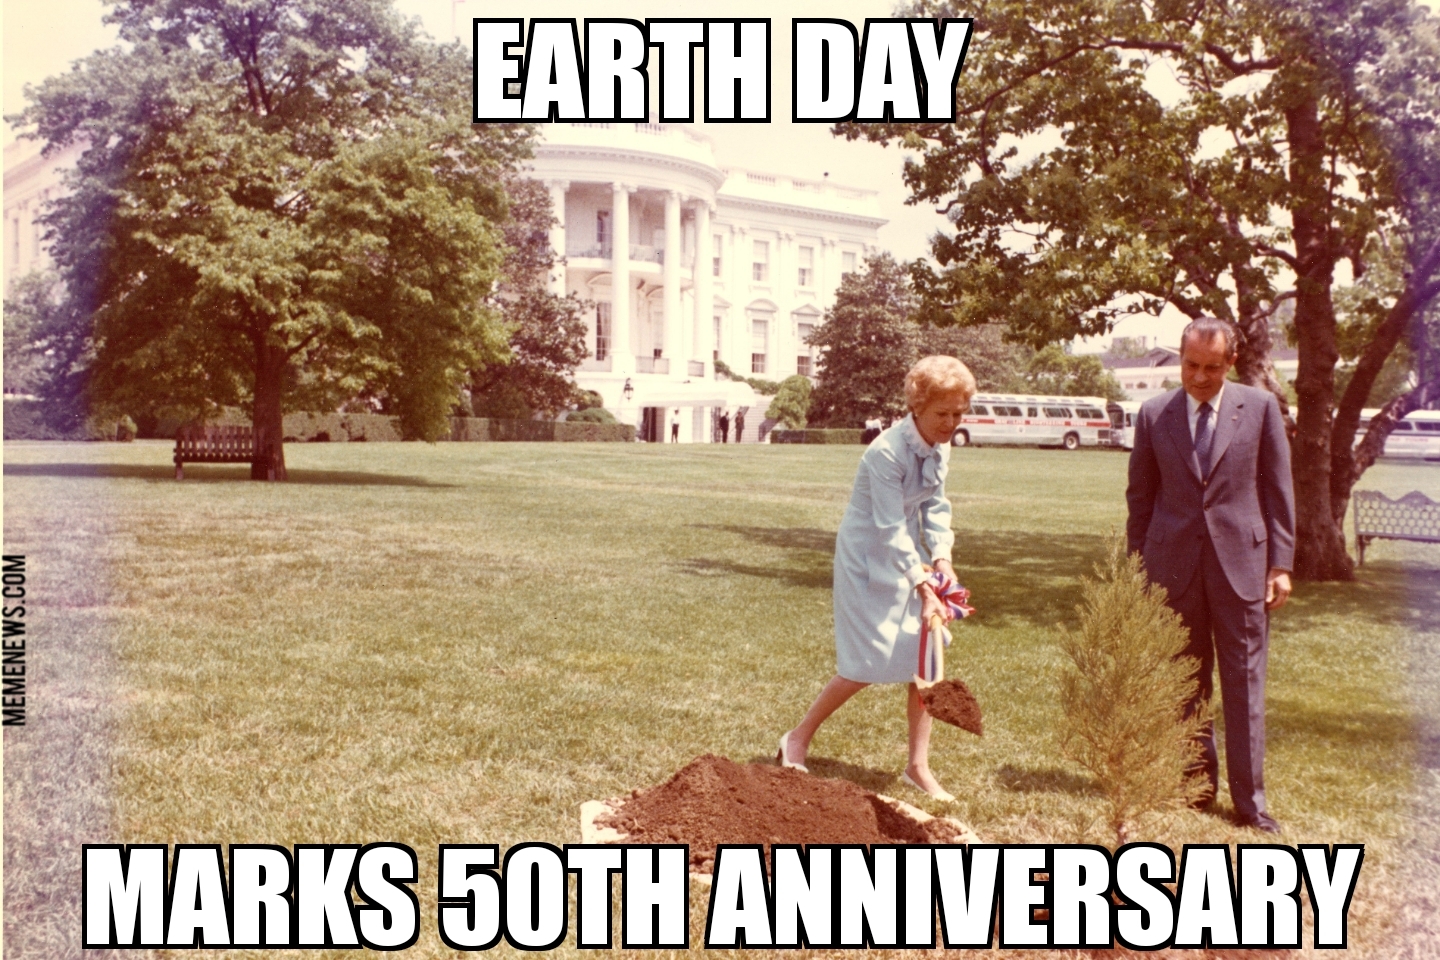 Earth Day 50th anniversary